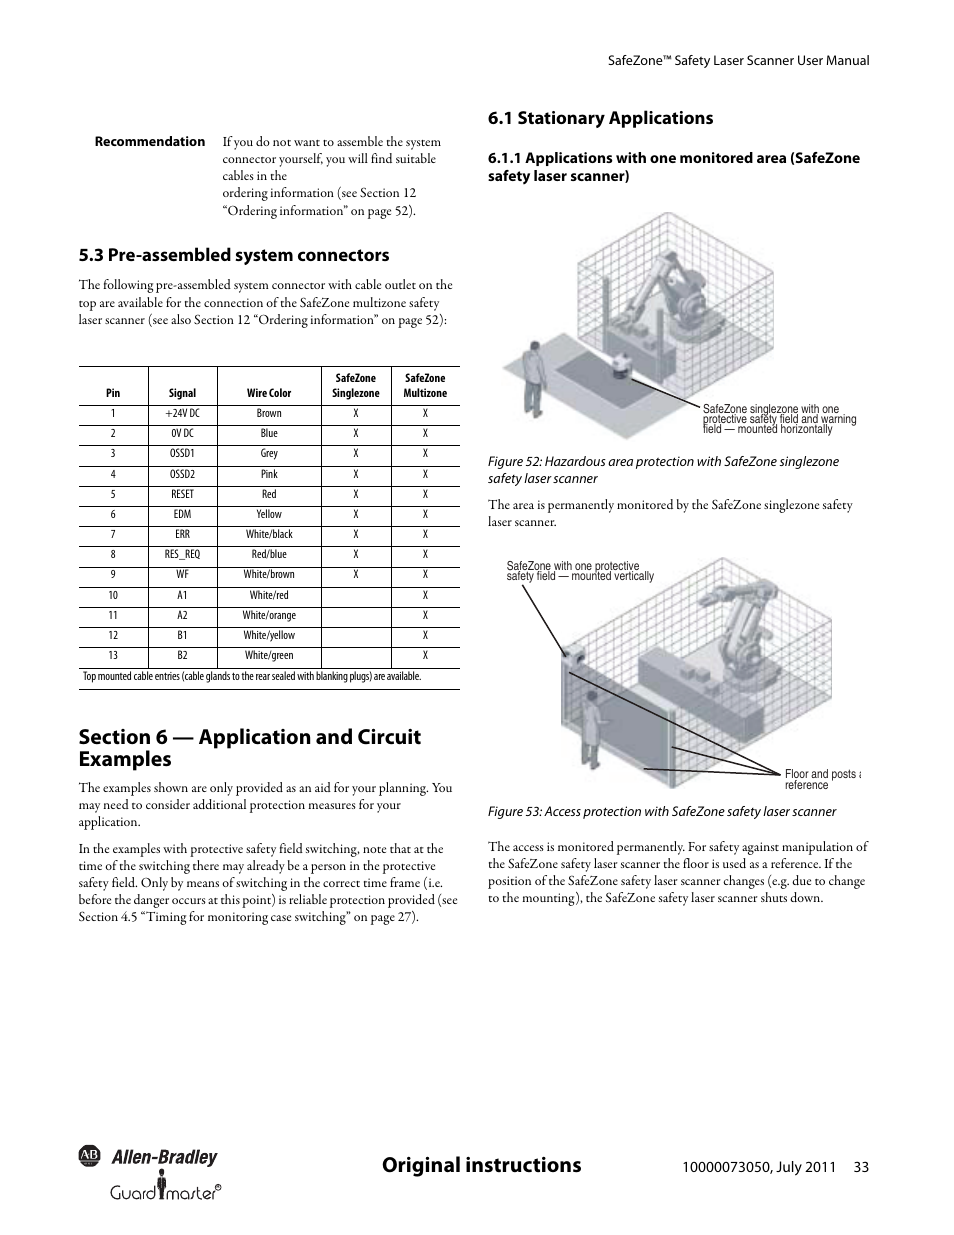 Original instructions, 3 pre-assembled system connectors, 1 stationary applications | Rockwell Automation 442L SafeZone Singlezone & Multizone Safety Laser Scanner User Manual | Page 35 / 60